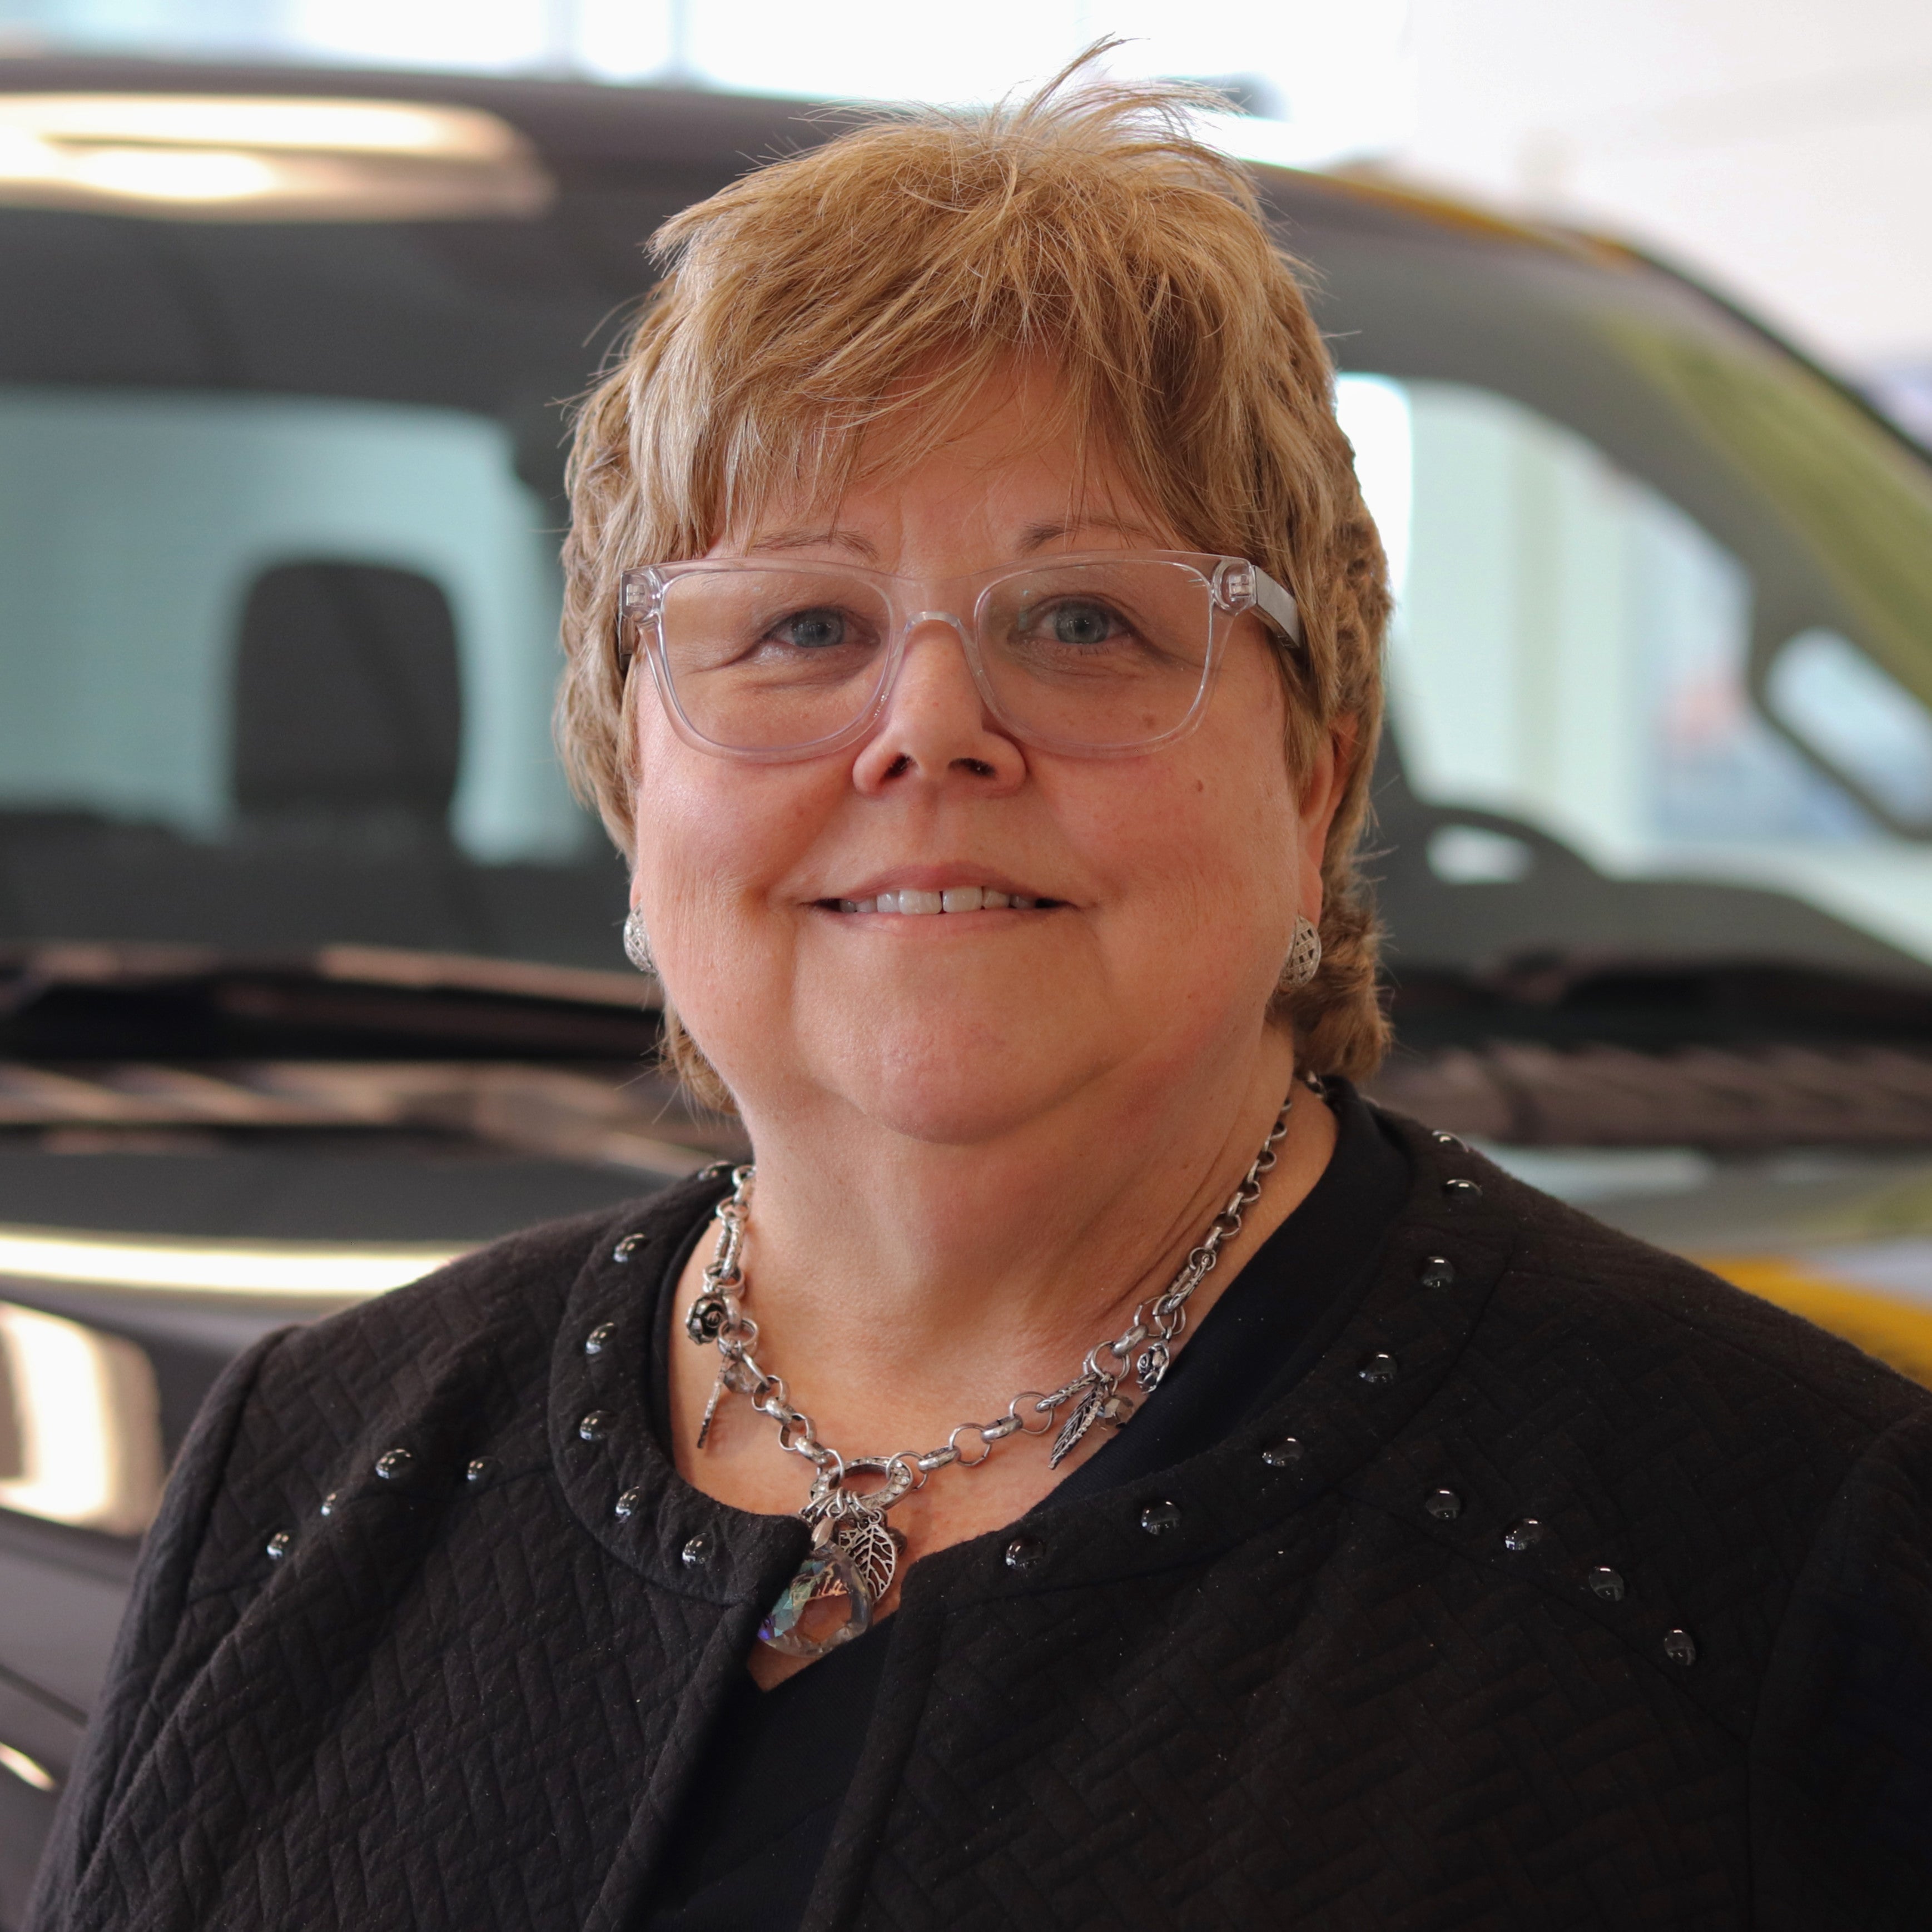 Bess Wills, General Manager at Gresham Ford